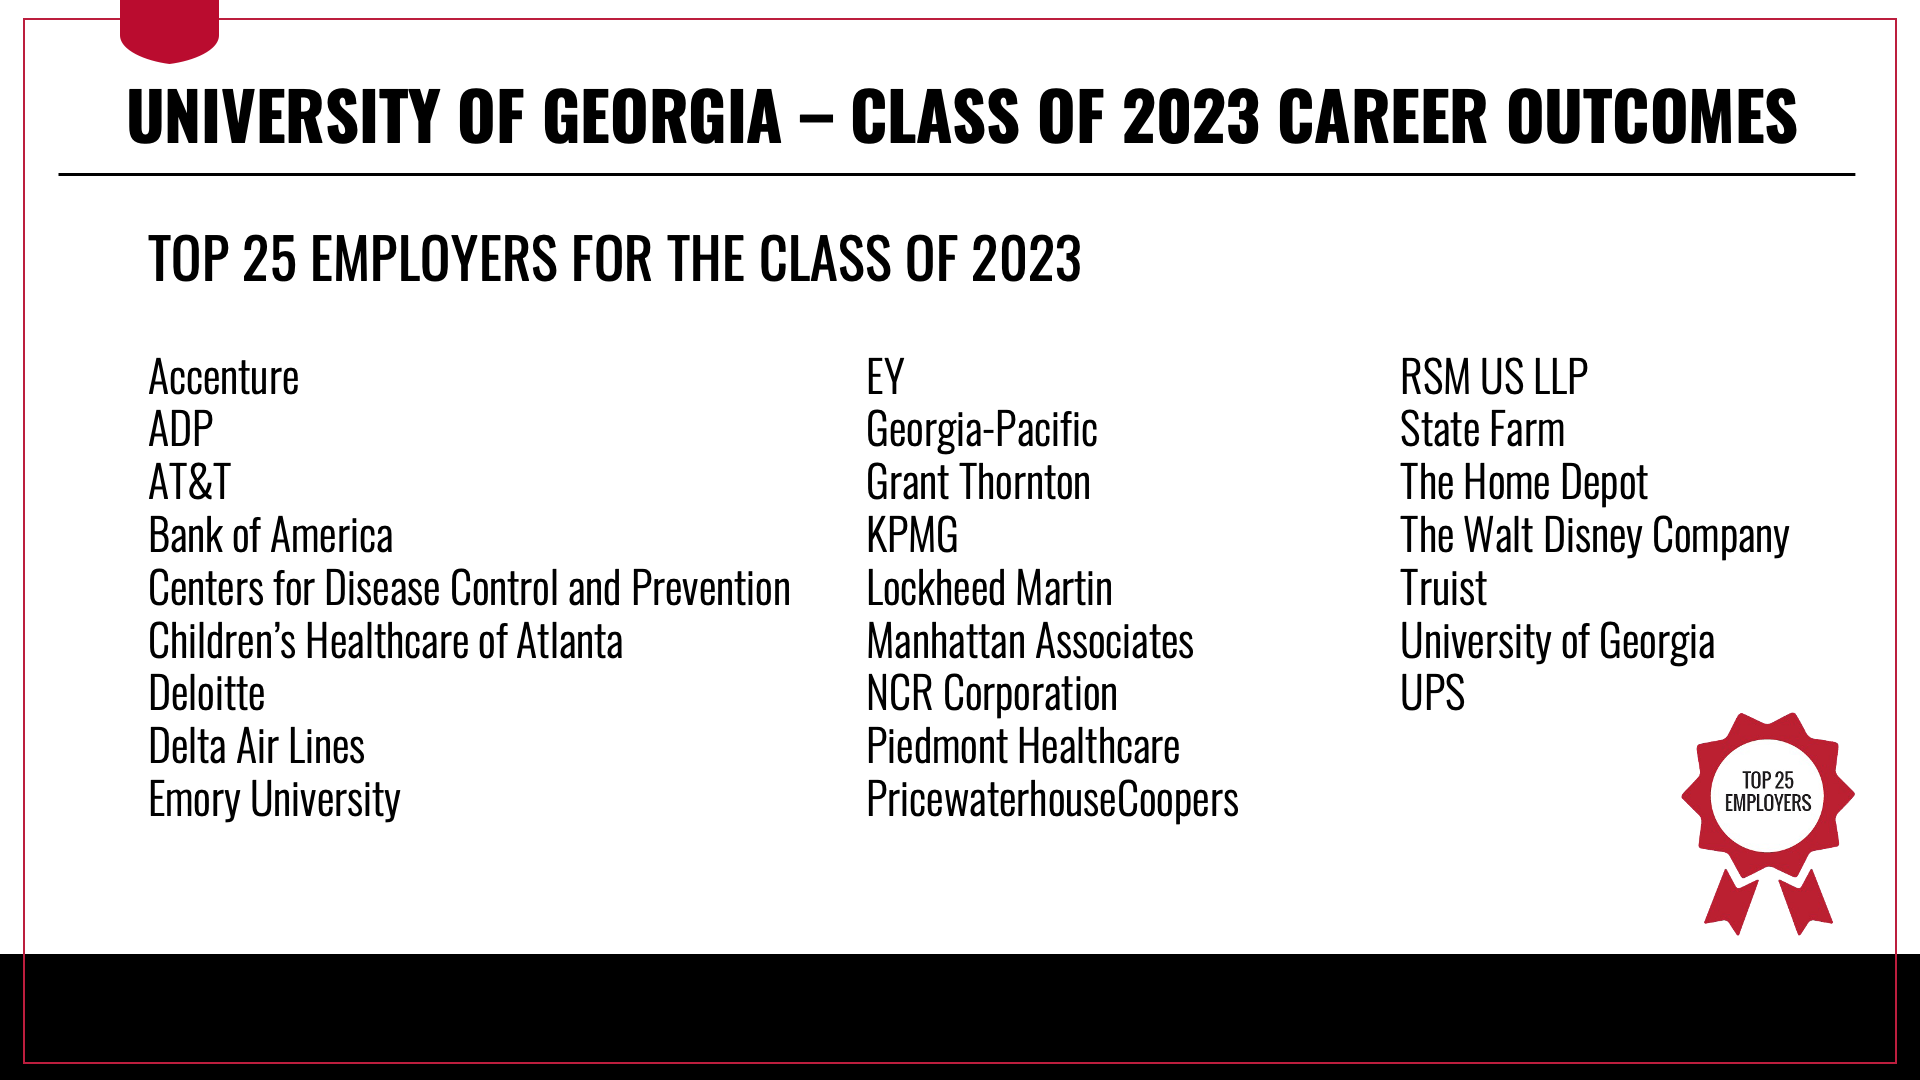 The top employers for UGA Class of 2023 graduates were Accenture, ADP, AT&T, Bank of America, Centers for Disease Control and Prevention, Children’s Healthcare of Atlanta, Deloitte, Delta Air Lines, Emory University, EY, Georgia-Pacific, Grant Thornton, KPMG, Lockheed Martin, Manhattan Associates, NCR Corporation, Piedmont Healthcare, PricewaterhouseCoopers, RSM US LLP, State Farm, The Home Depot, The Walt Disney Company, Truist, University of Georgia, and UPS